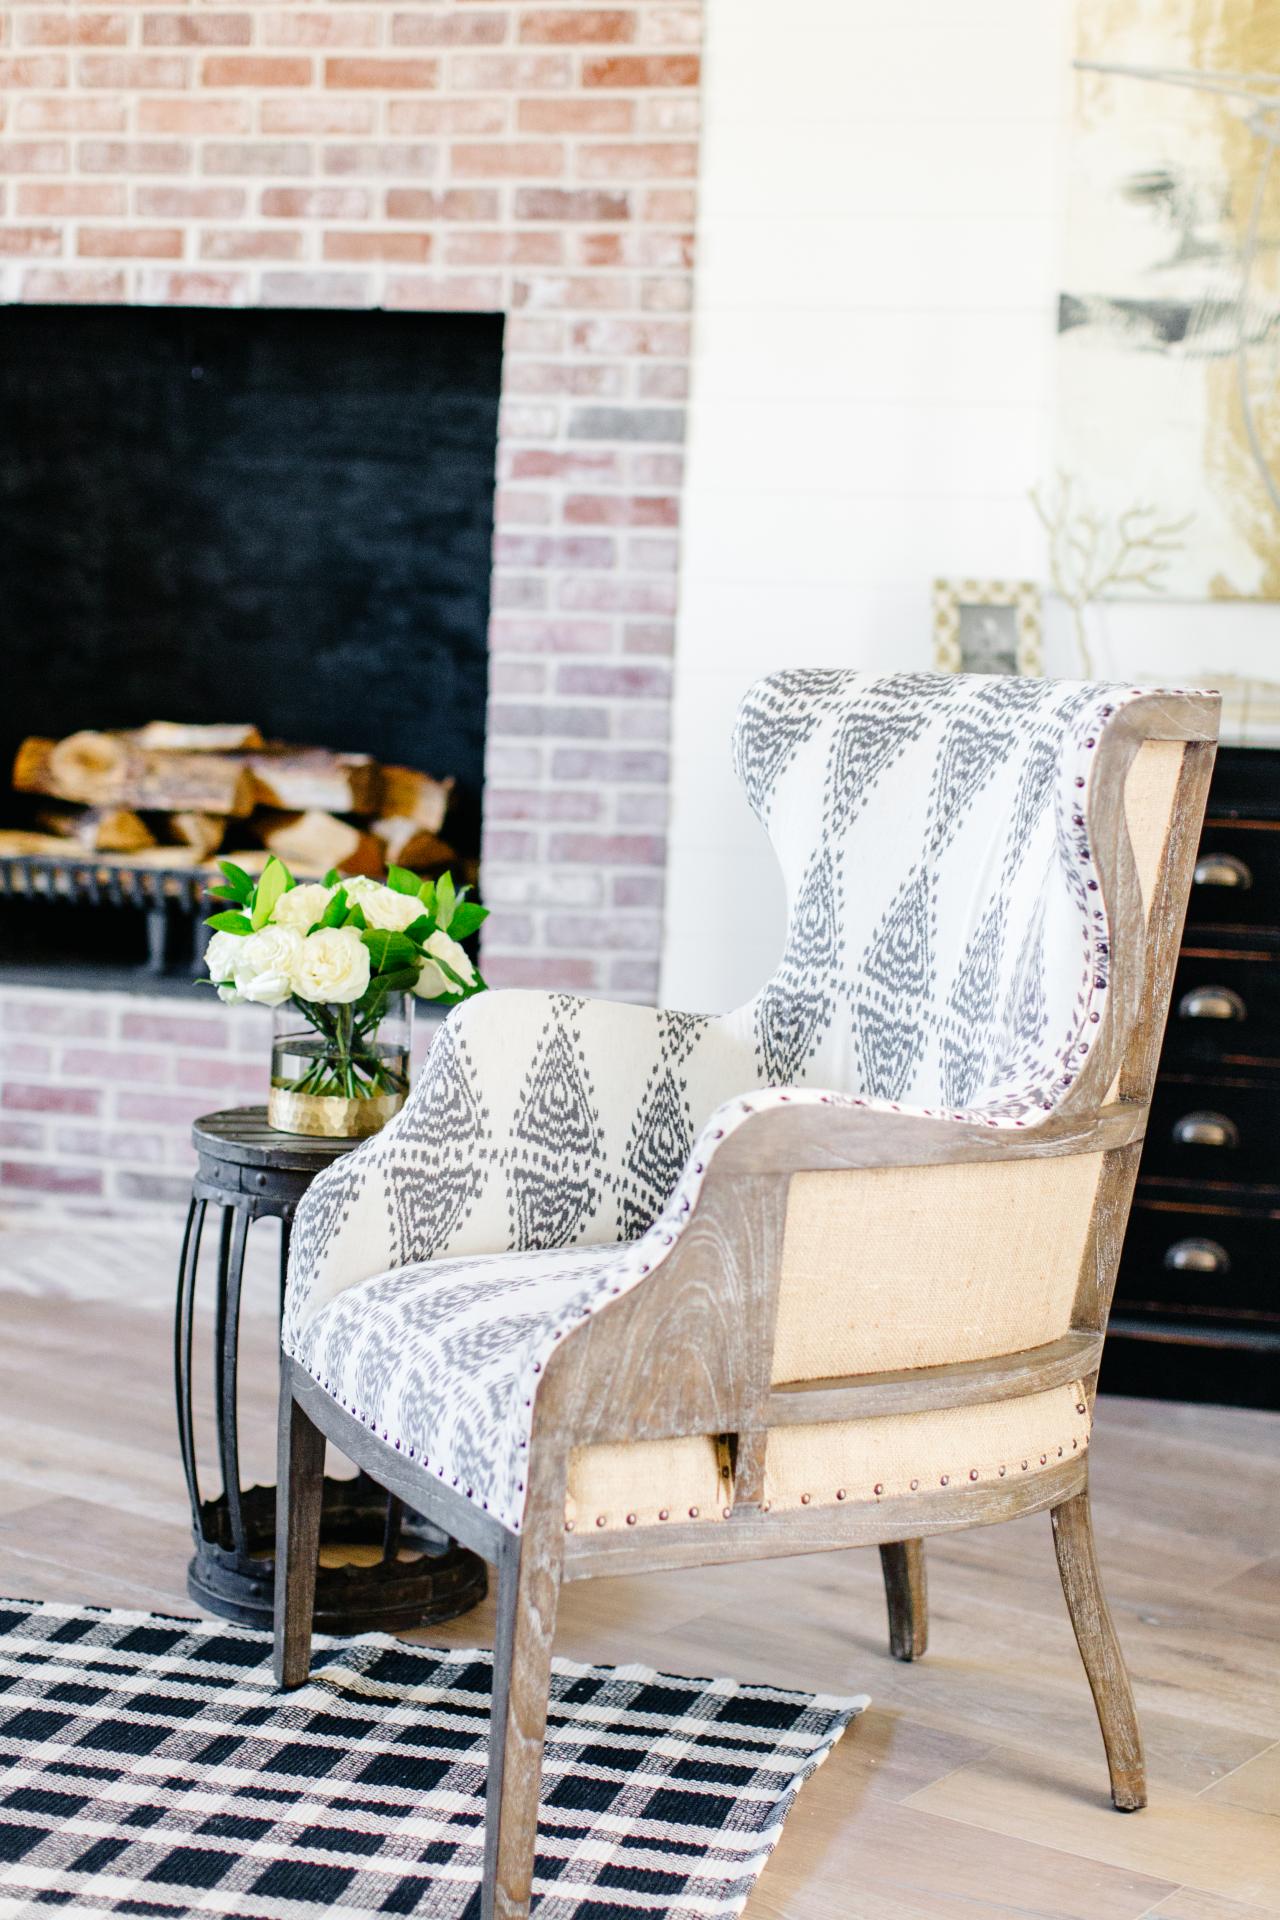 Stunning Accent Chair Brings Subtle Texture to the Modern